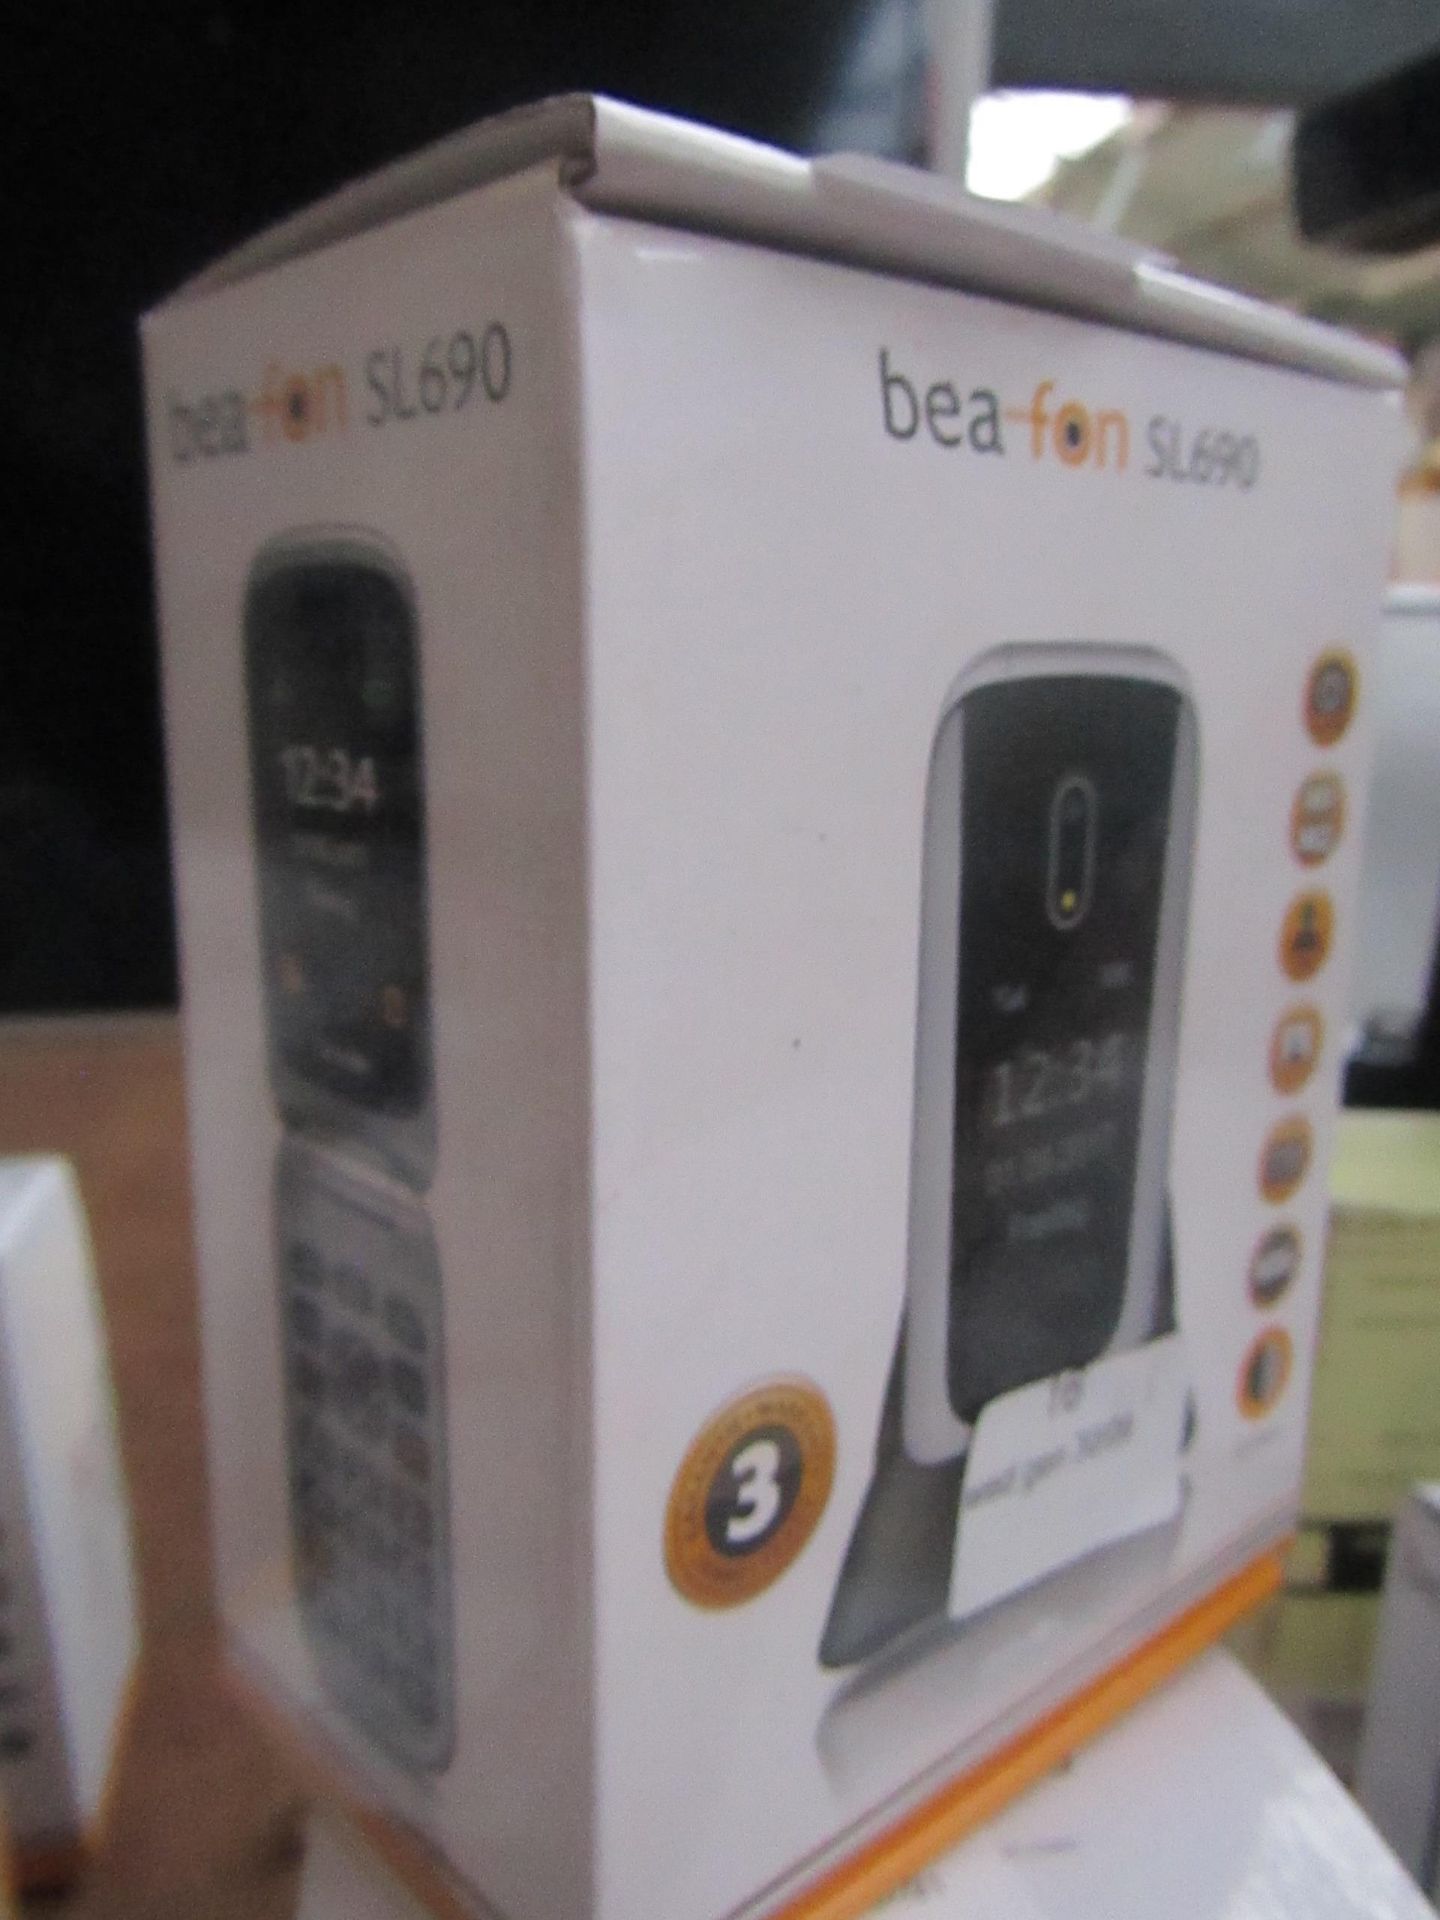 Bea fon SL690 Mobile phone, unchecked and boxed